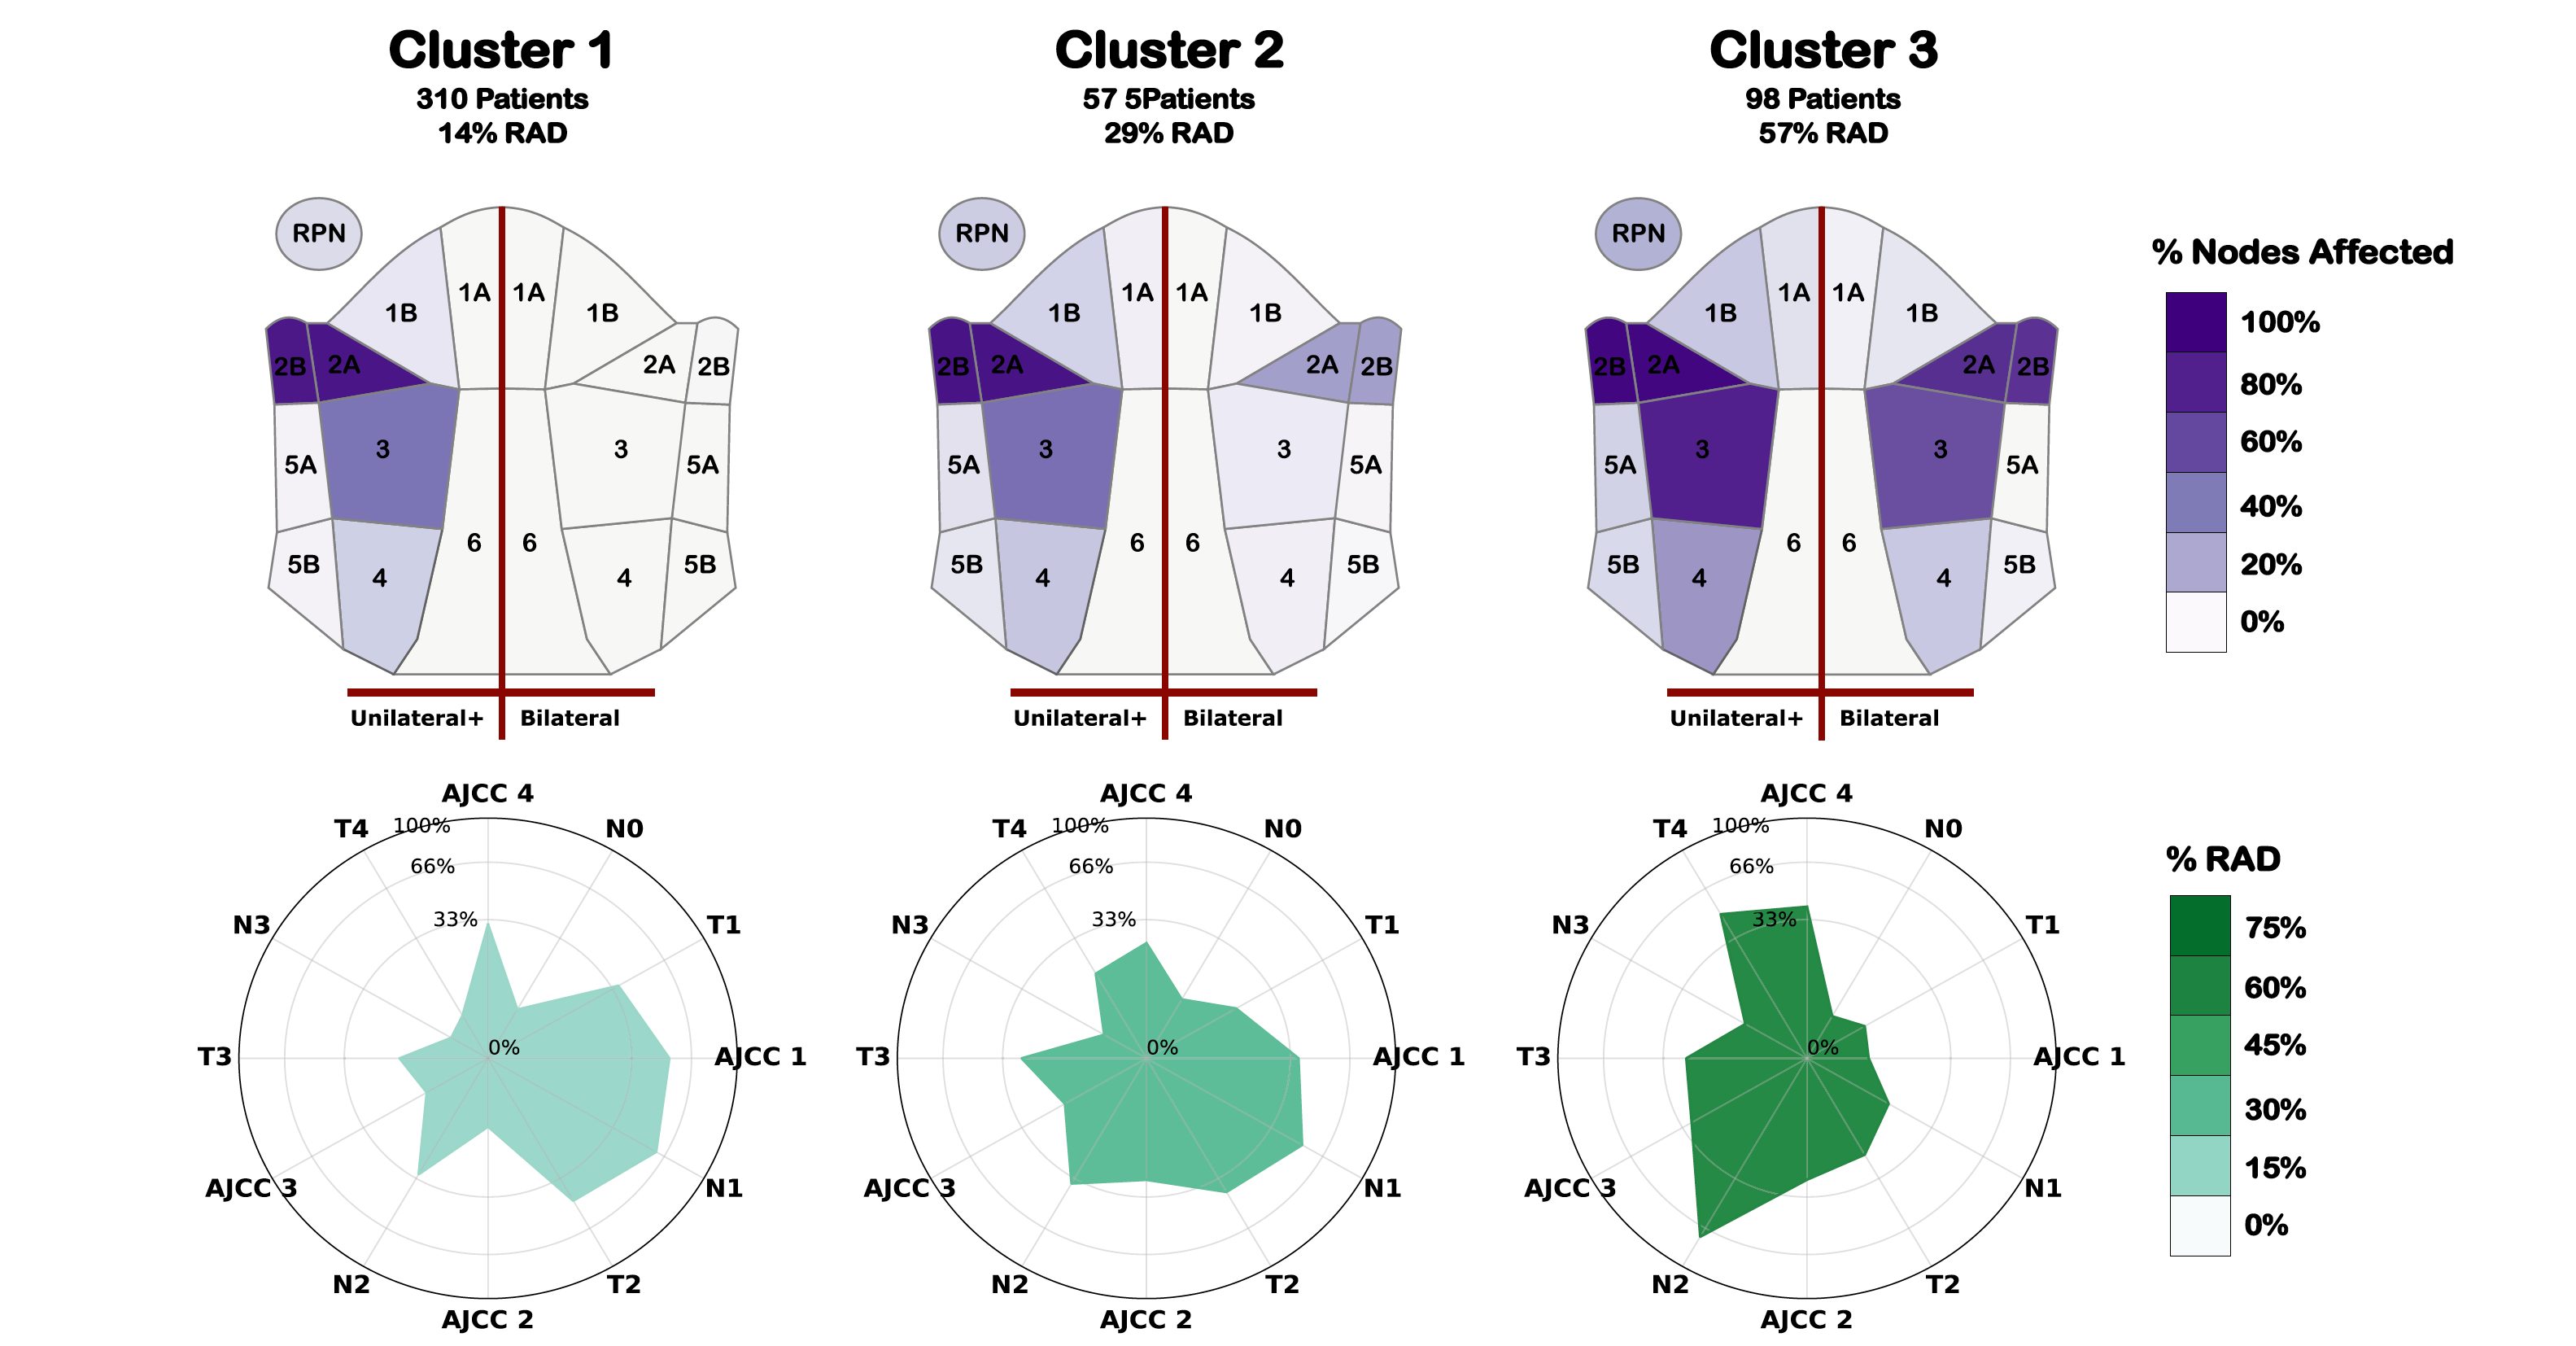 Average lymph node involvement and clinical staging categories of the 3 derived lymph node + radiomics clusters across both the training and validation datasets.